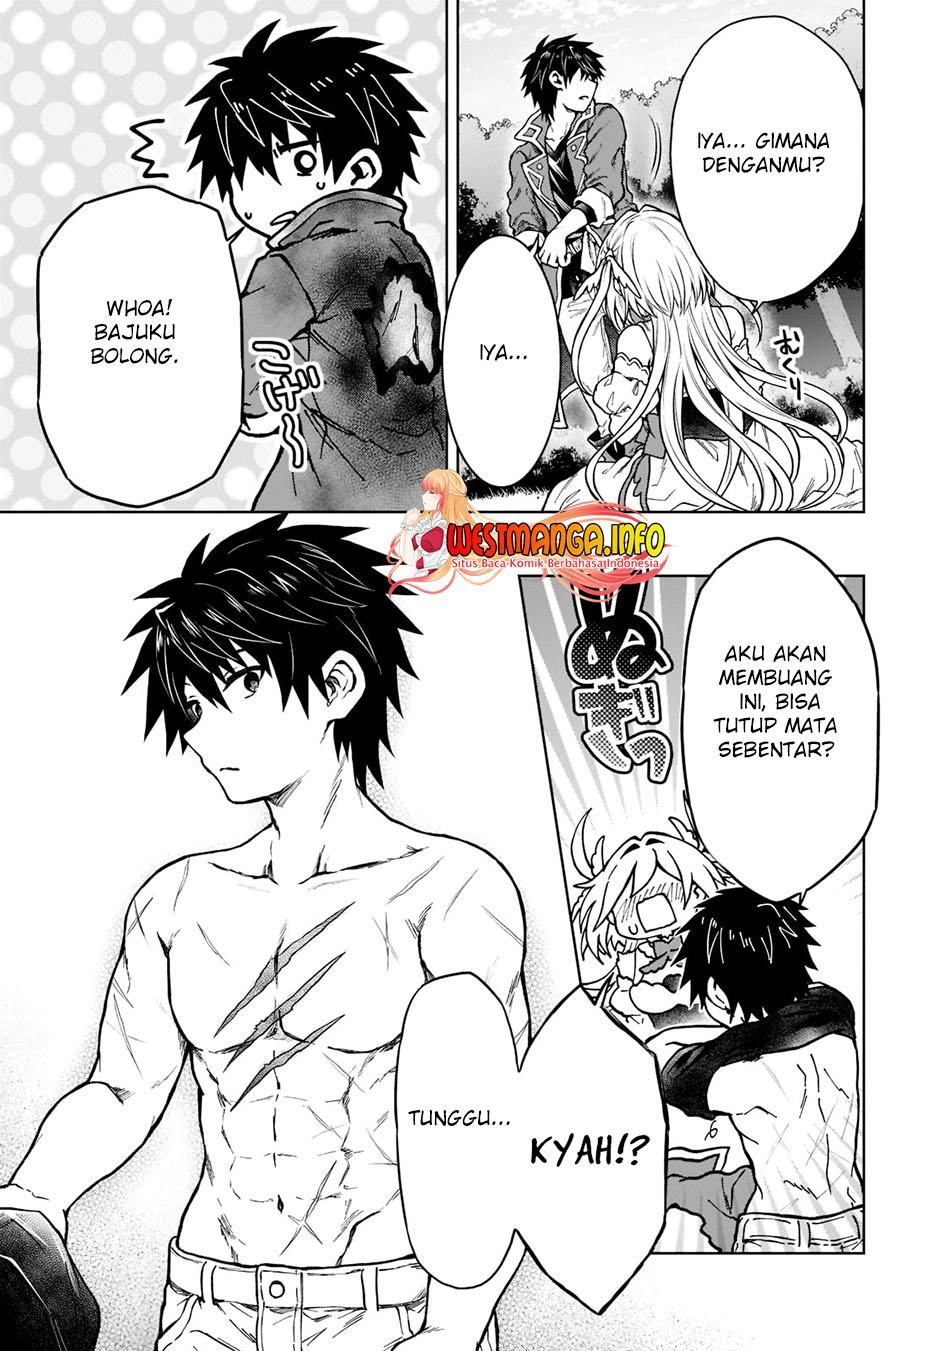 Dilarang COPAS - situs resmi www.mangacanblog.com - Komik d rank adventurer invited by a brave party and the stalking princess 011 - chapter 11 12 Indonesia d rank adventurer invited by a brave party and the stalking princess 011 - chapter 11 Terbaru 29|Baca Manga Komik Indonesia|Mangacan